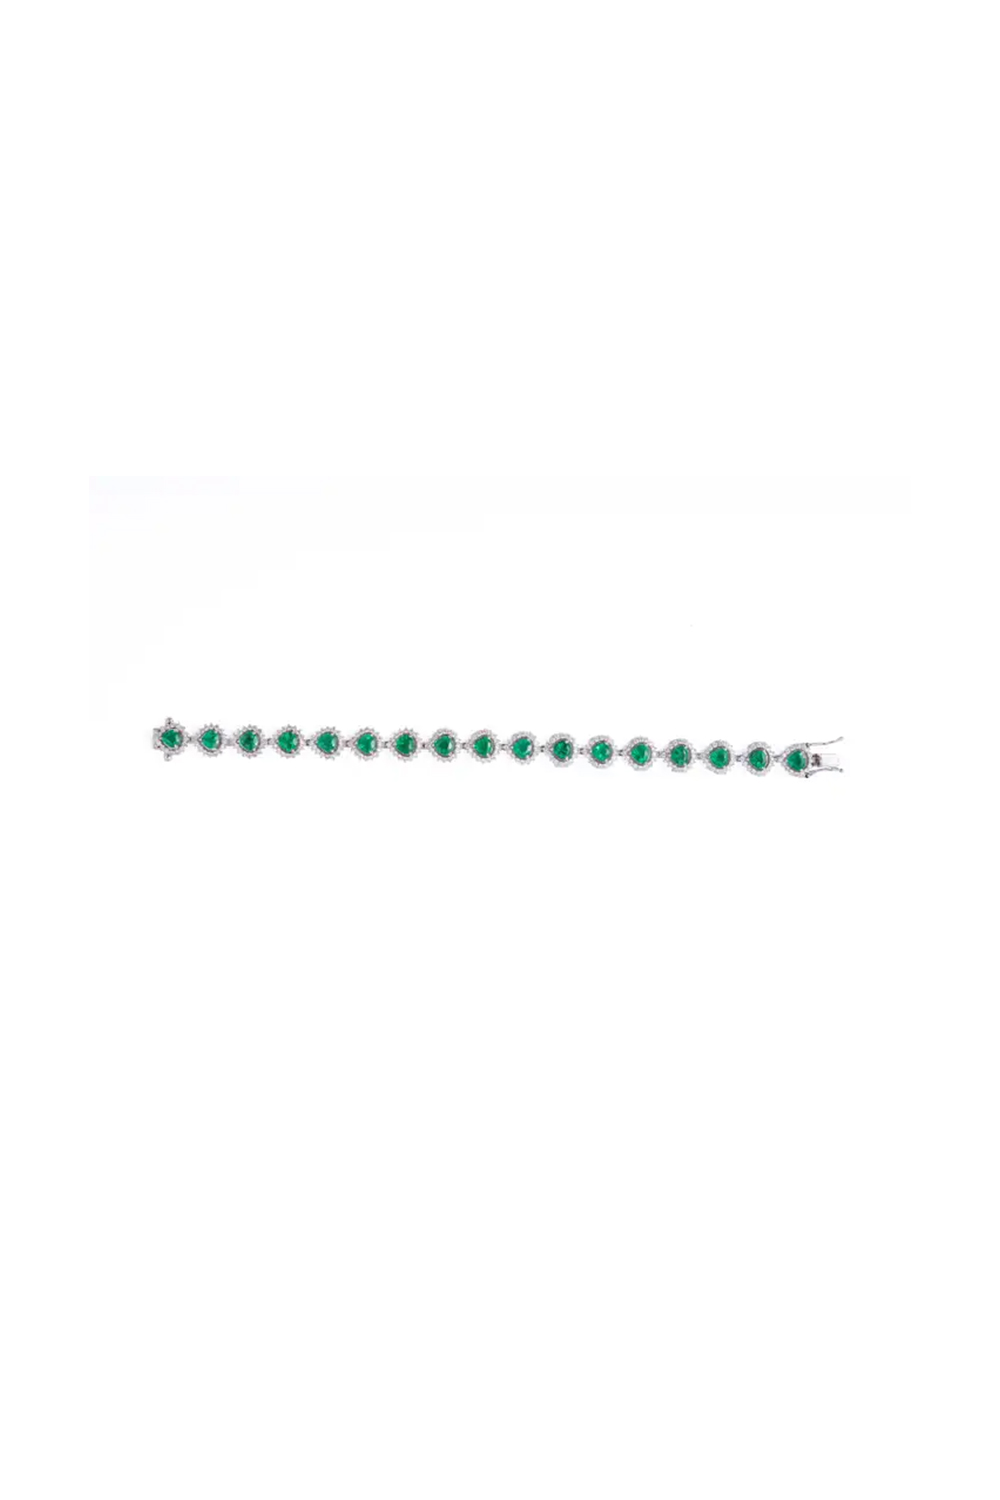 7.42cts Zambian Emerald Tennis Bracelet with 3.00cts Diamonds and 14k Gold